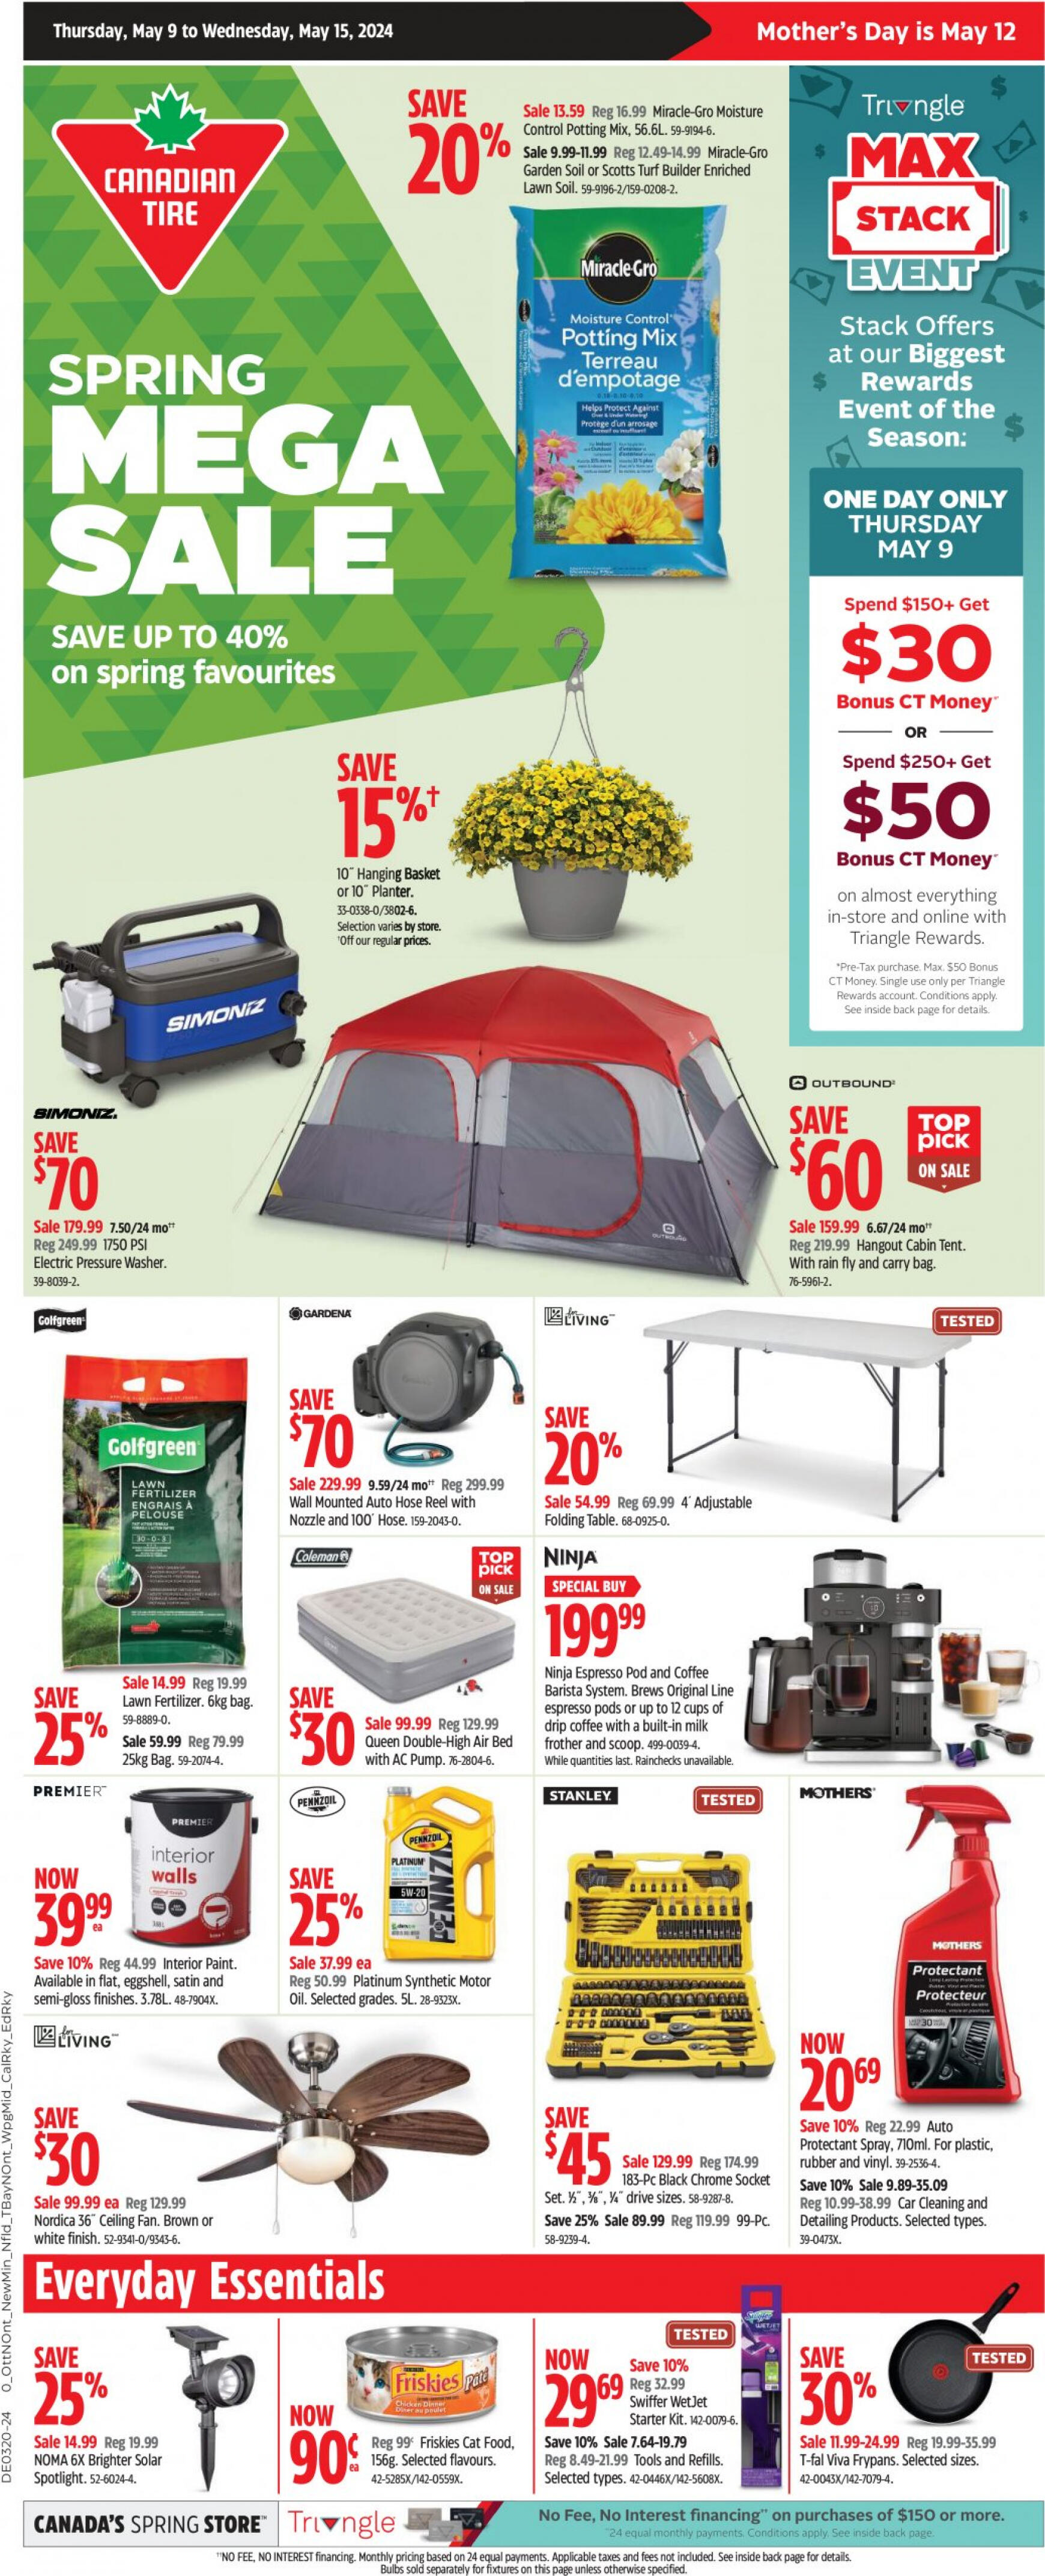 canadian-tire - Canadian Tire flyer current 09.05. - 15.05.